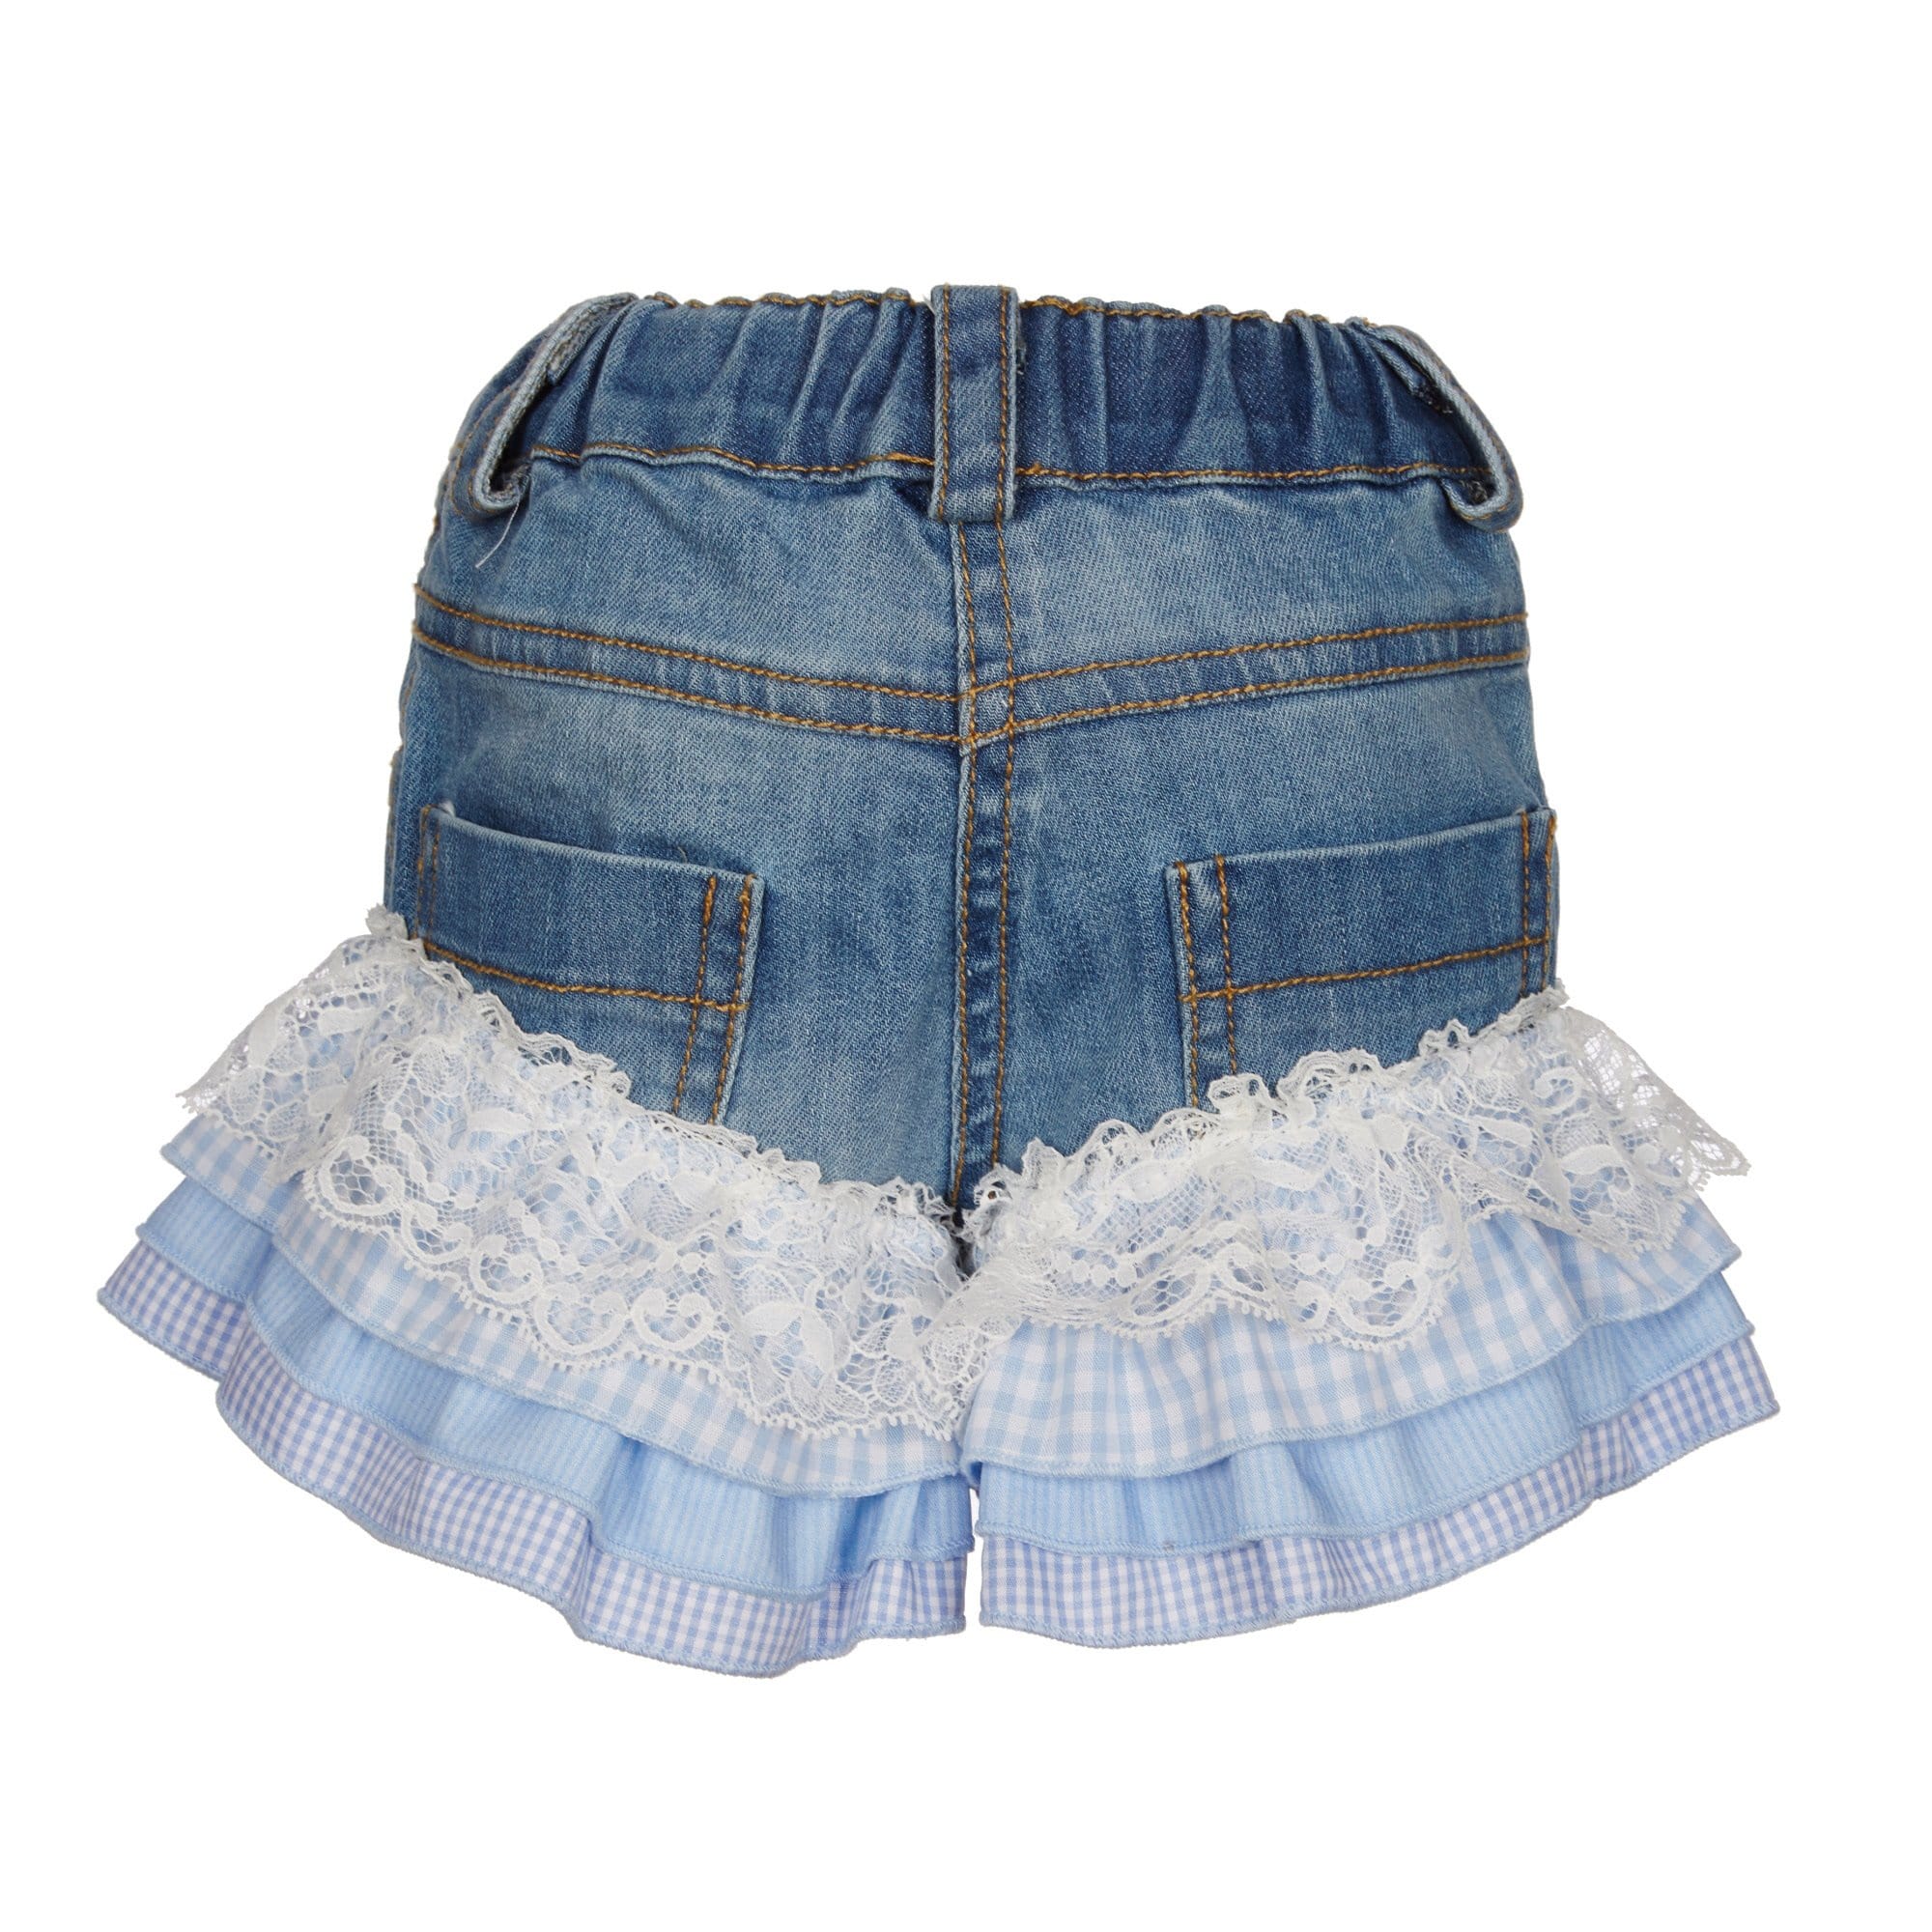 LAPIN HOUSE RUFFLE DENIM JACKET AND SHORTS WITH PEACH TOP